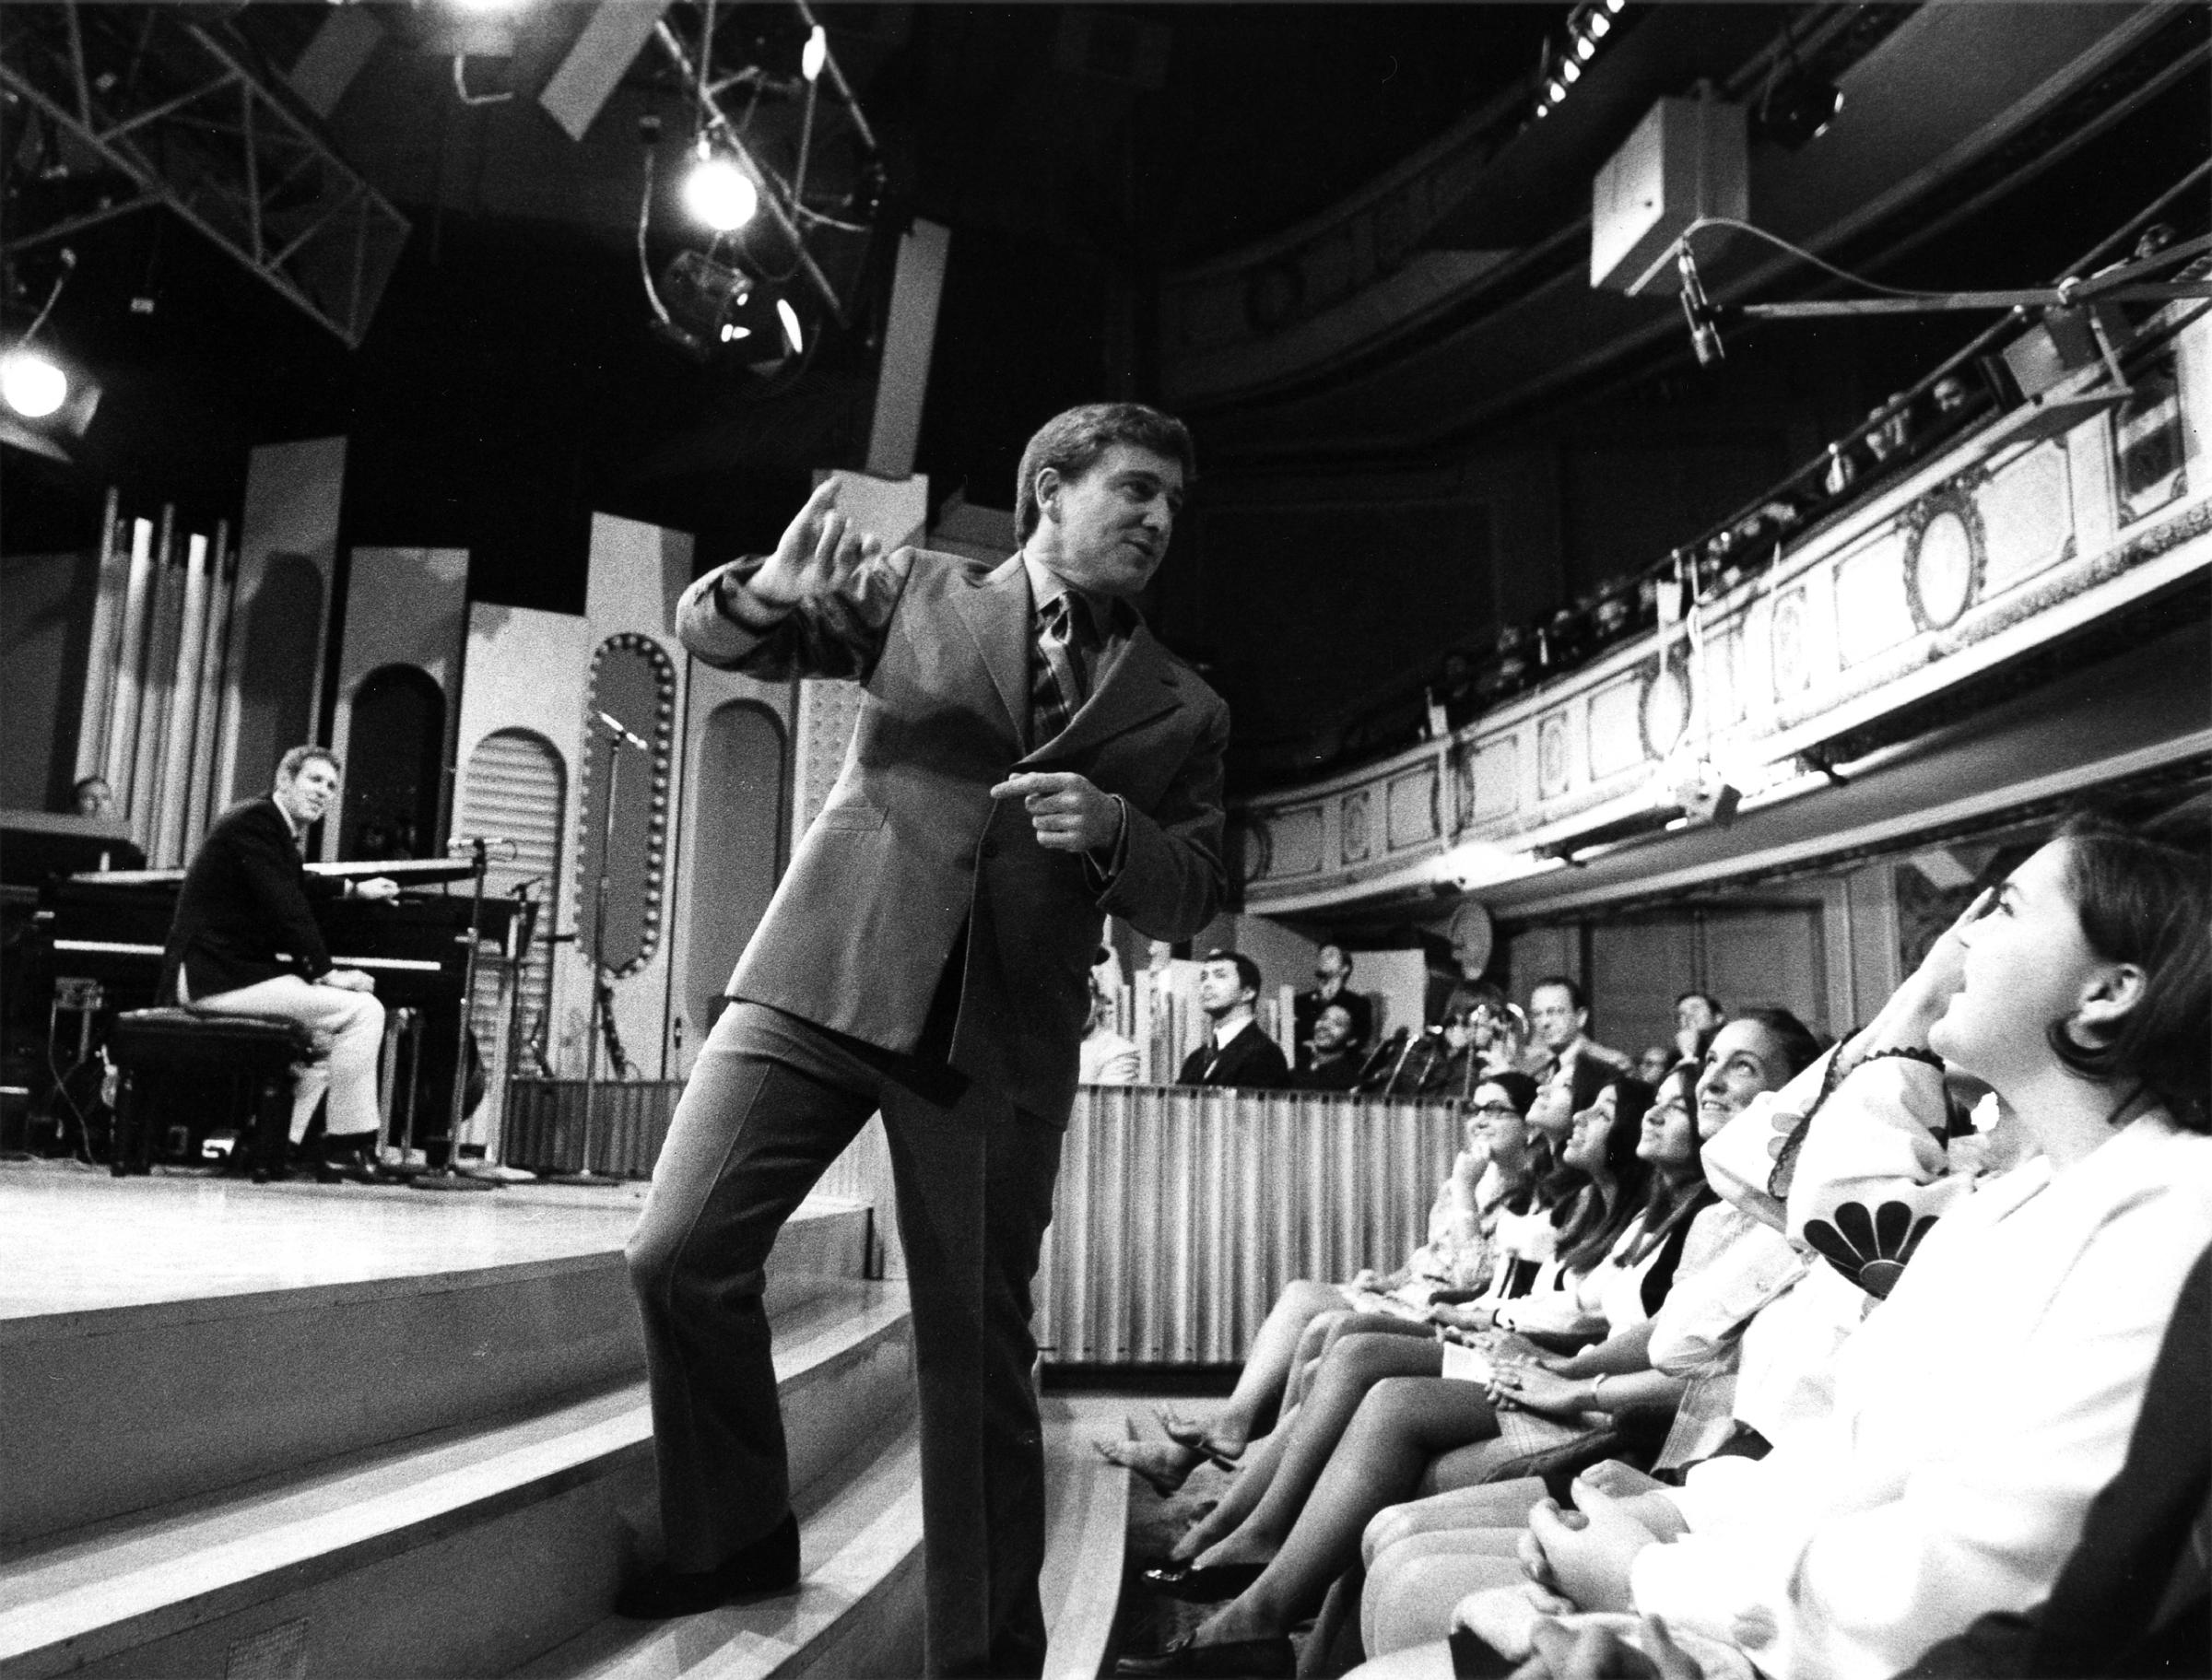 Merv Griffin warming up the audience before the show, 1969.